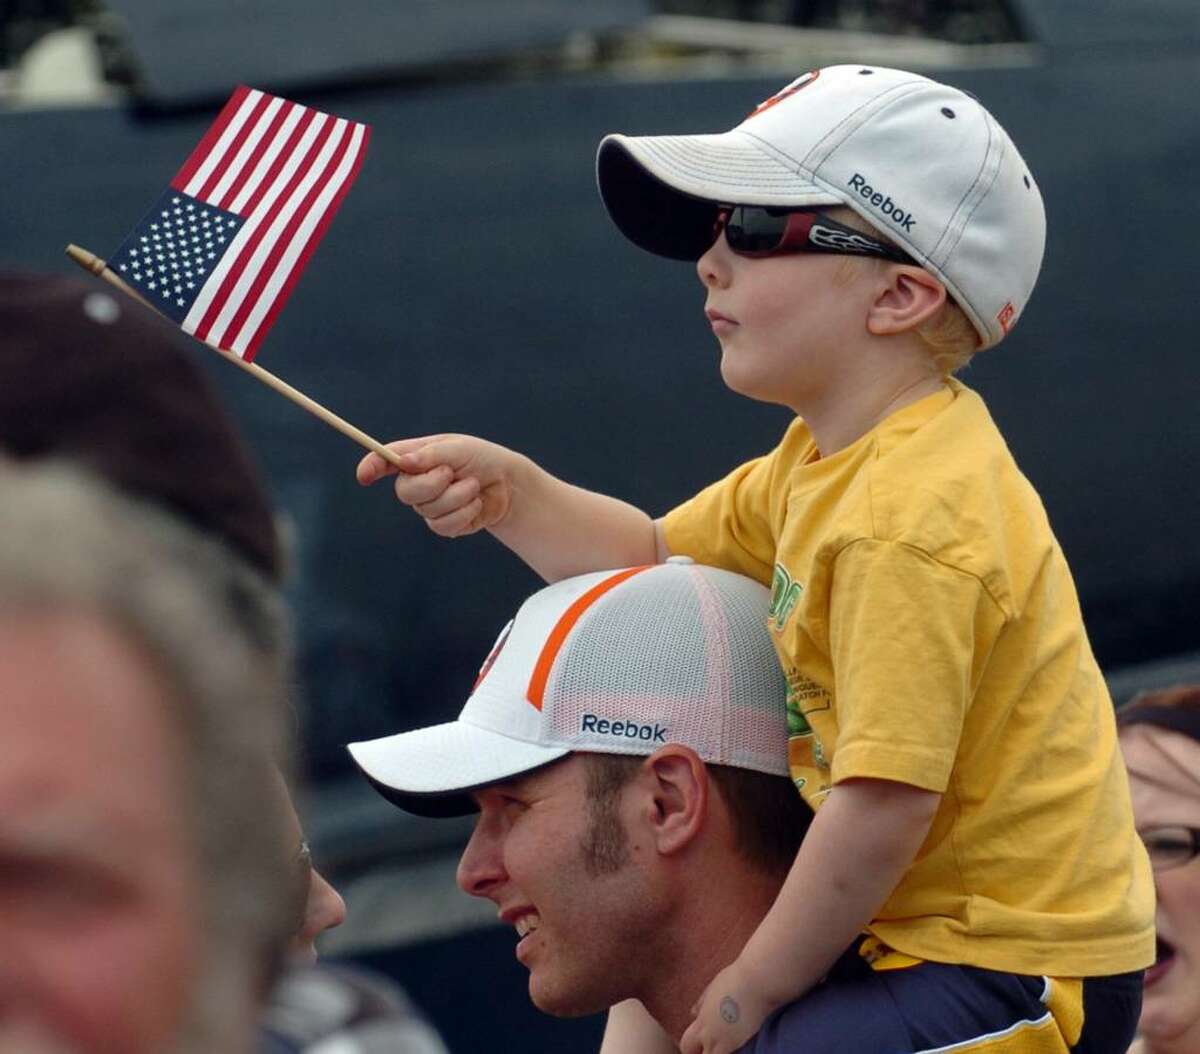 Aiden Courtney, of Bridgeport, waves the US flag while sitting atop his dad Chris' shoulders, during the Wings and Wheels 2010 car and air show at Sikorsky Memorial Airport in Stratford, Conn. on Saturday May 29, 2010.